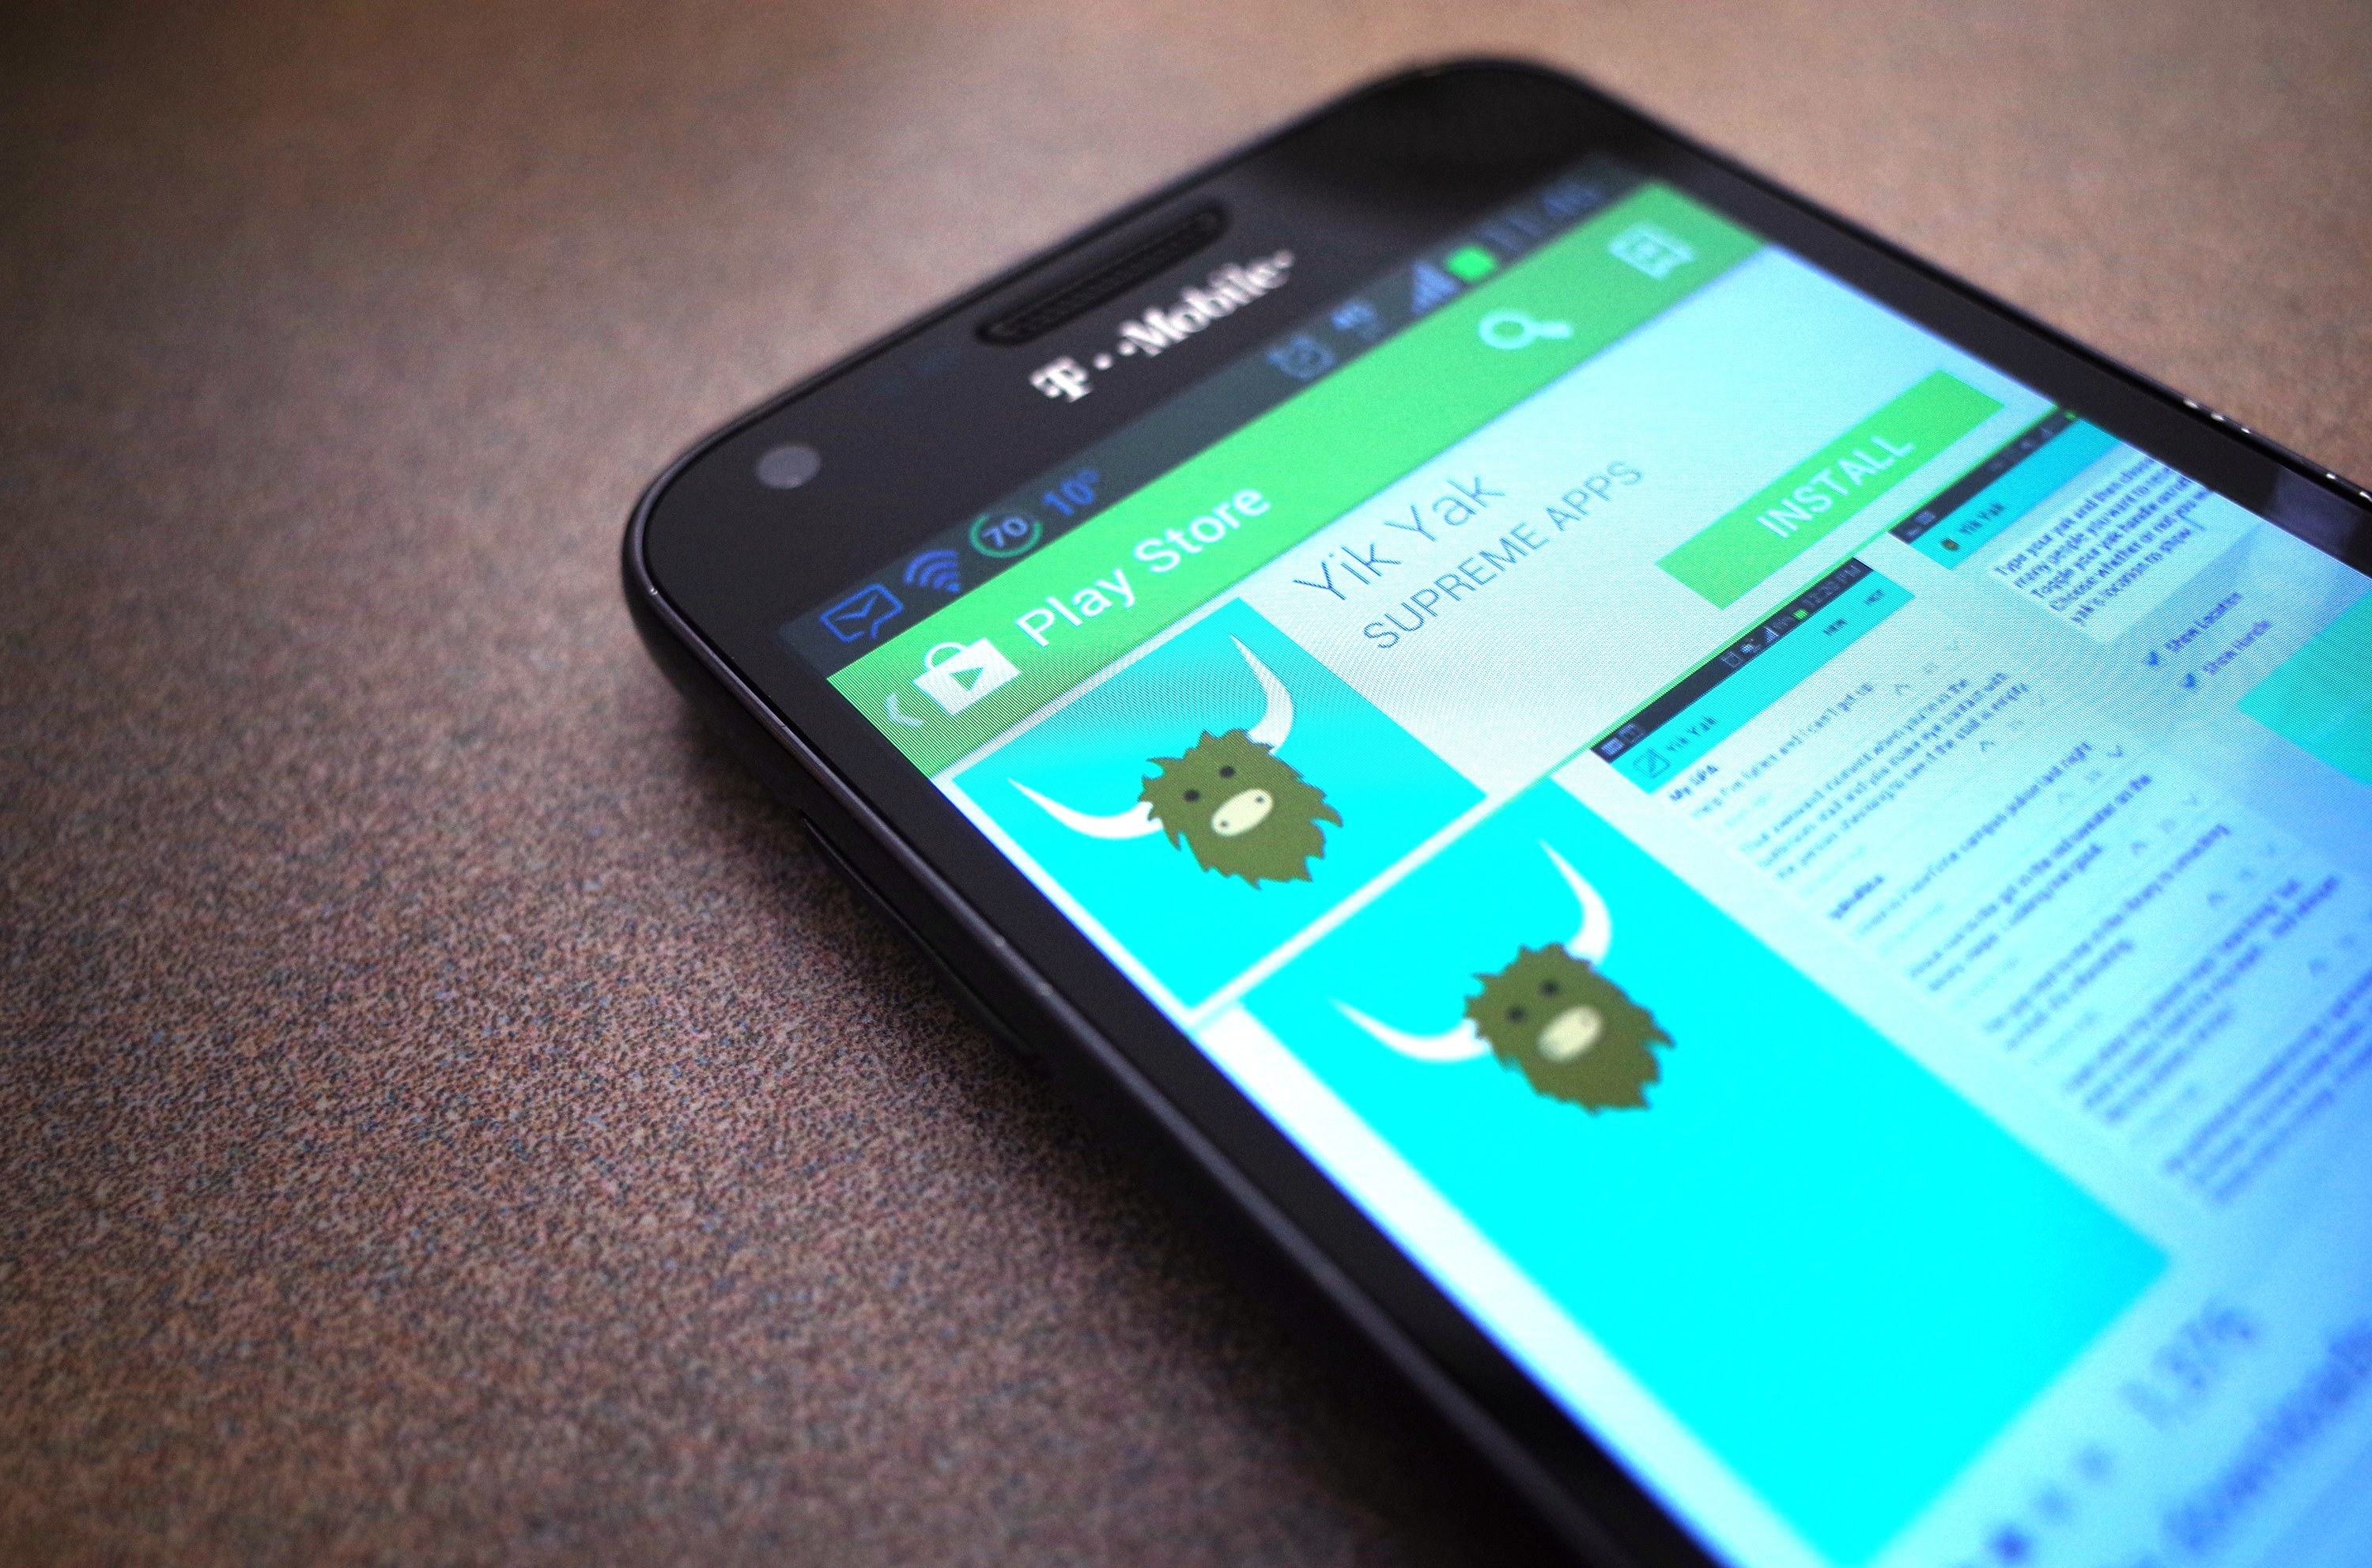 The Yik Yak page in the Google Play Store on a mobile phone